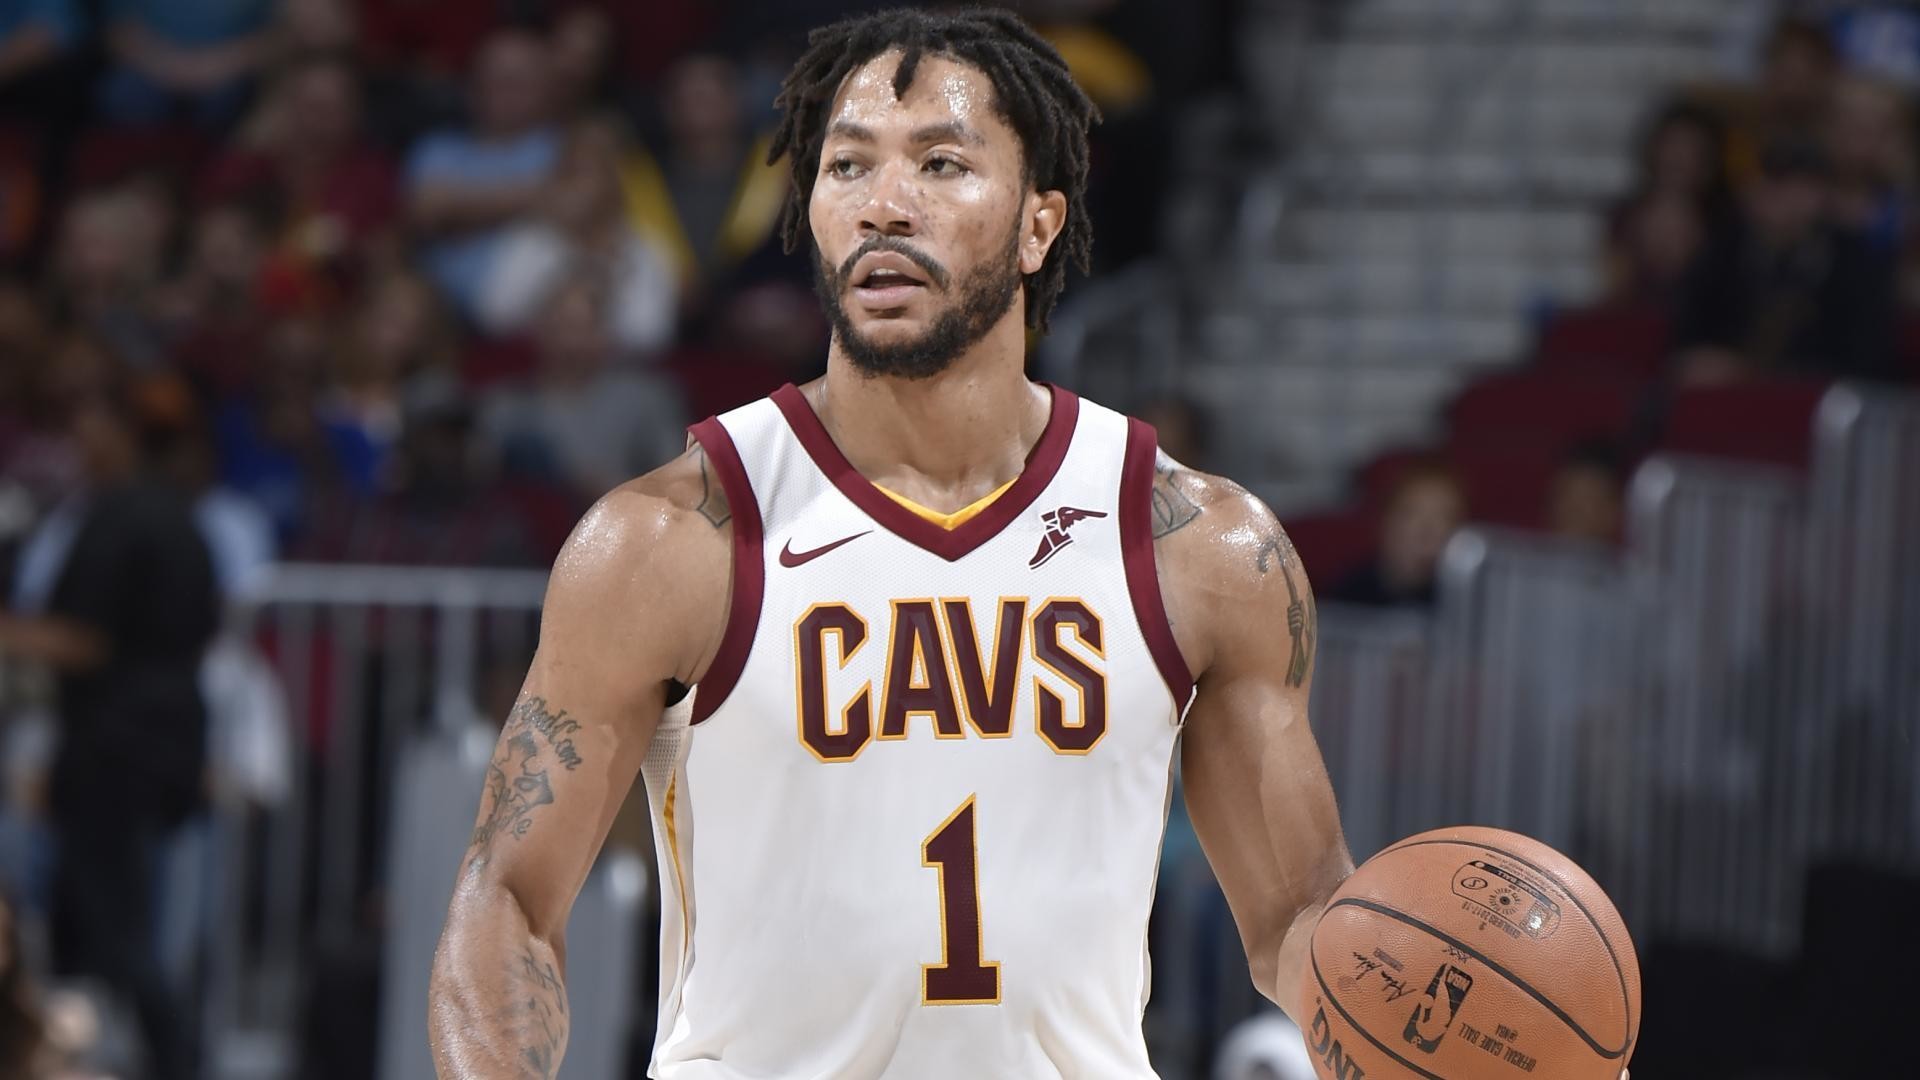 1920x1080 Derrick Rose is Reportedly Parting With Cavaliers to Re-evaluate NBA Career